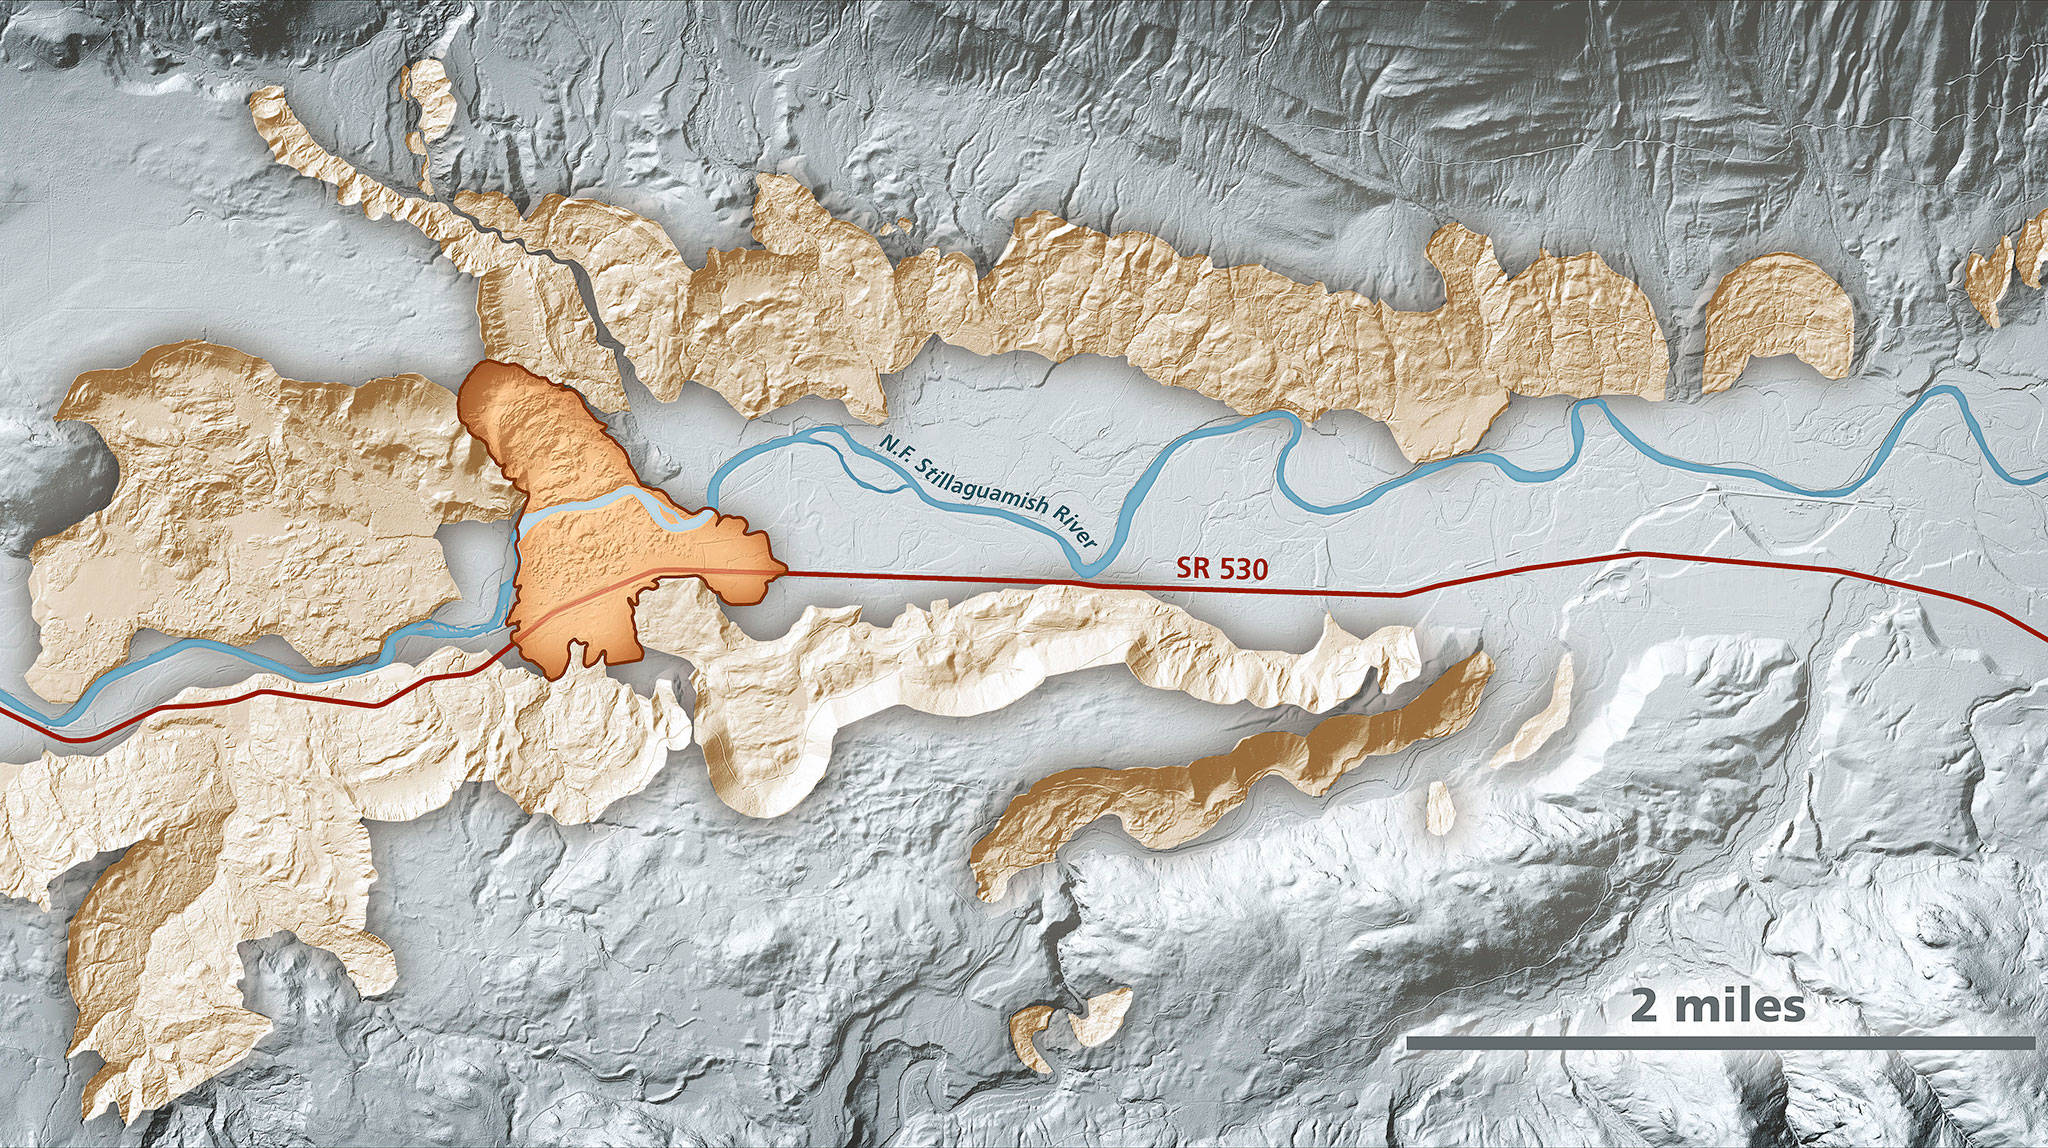 Lidar imagery enables geologists to accurately identify landslides, such as the area around the Highway 530 Oso landslide. In this area, lidar data show prehistoric landslides in beige along the North Fork Stillaguamish River. The darker-shaded, outlined area is the extent of the March 2014 Oso landslide. (Daniel Coe/Washington State Department of Natural Resources)